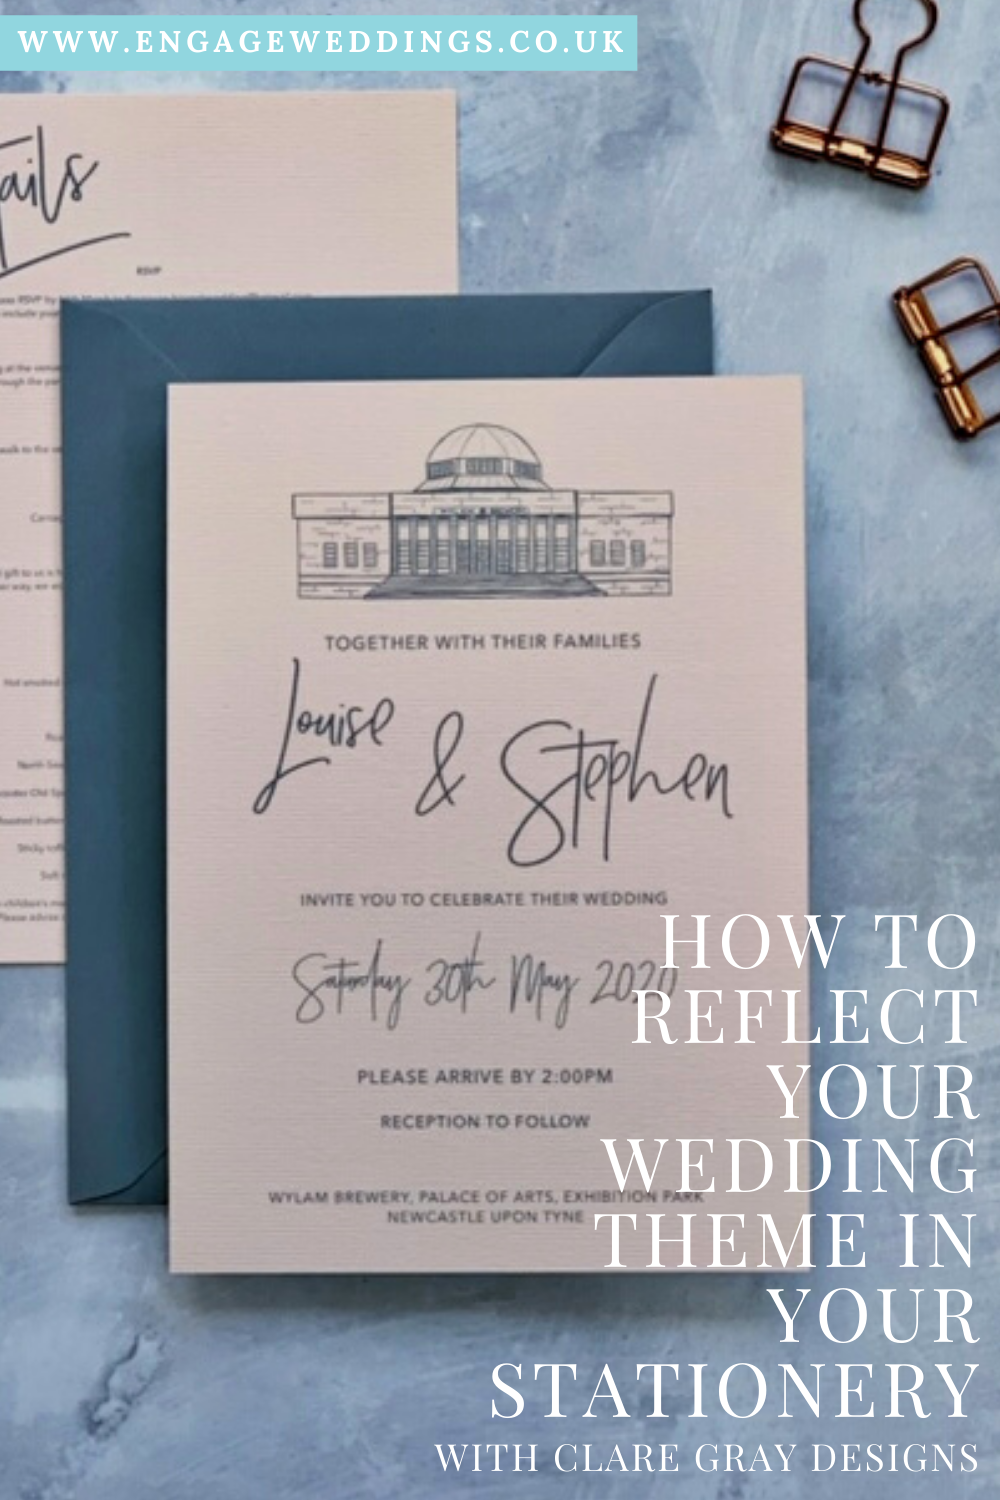 How to reflect your wedding theme in your stationery_engageweddings.co.uk